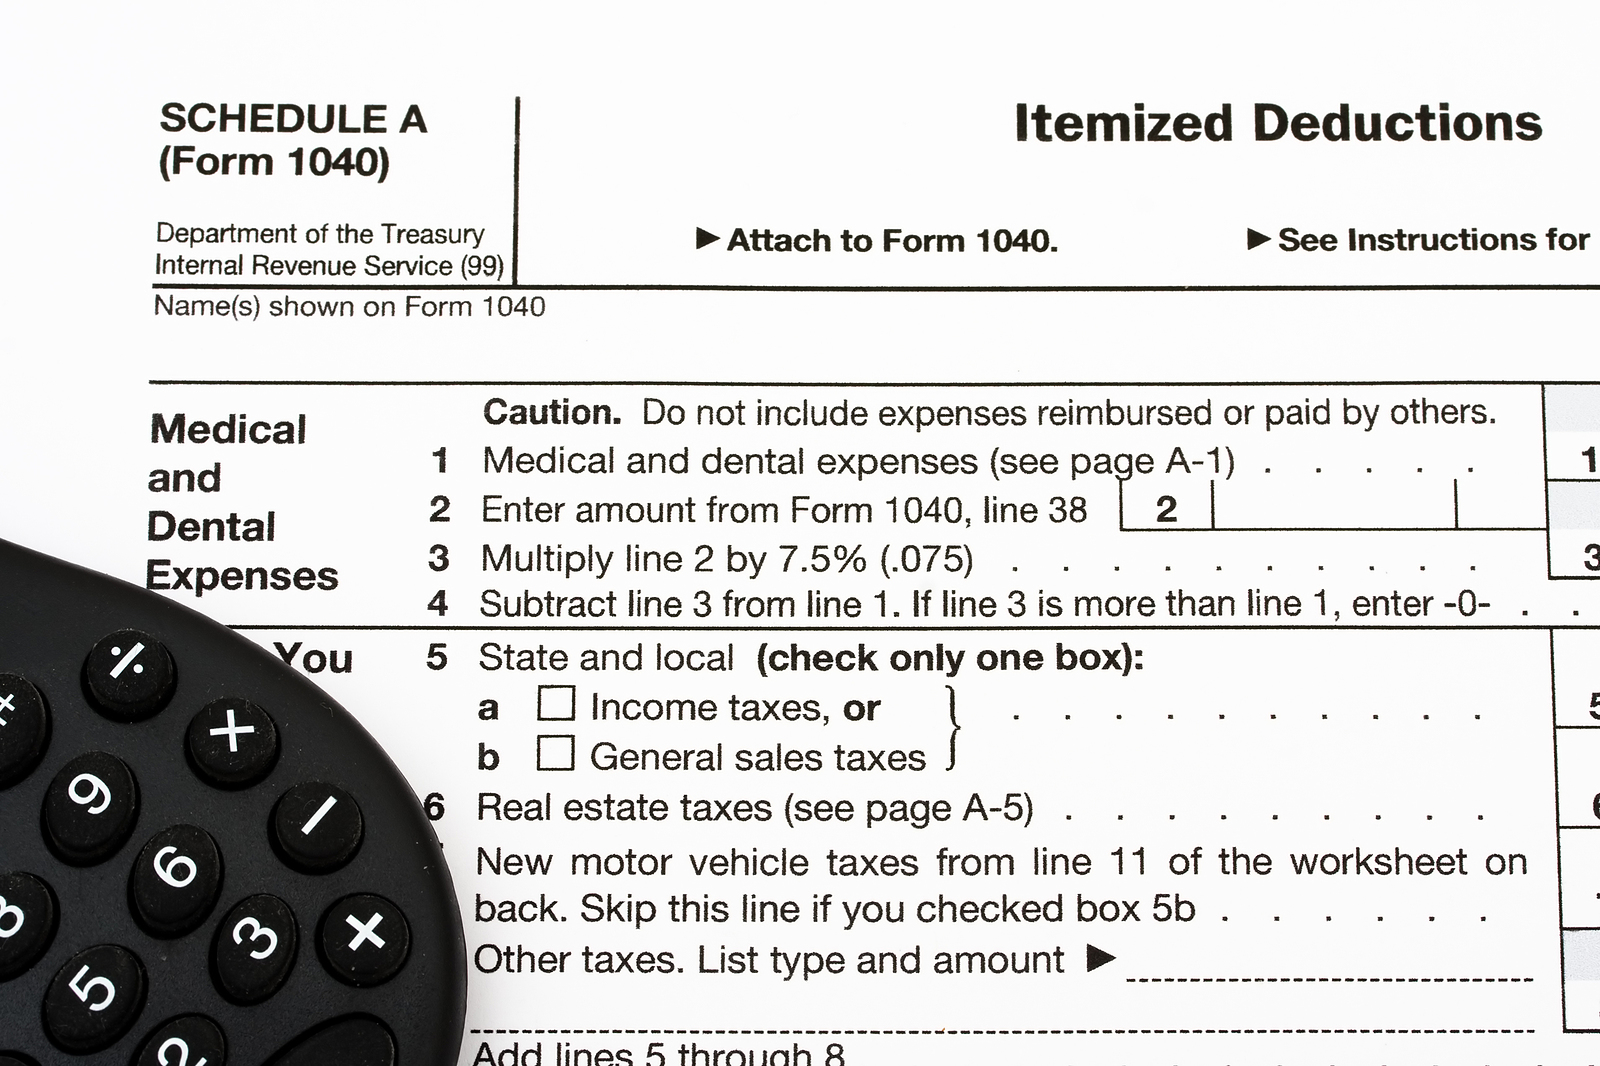 The-Itemized-Deductions-Dilemma-Is-This-a-Smart-Tax-Strategy-For-You-Myrick-CPA-DC